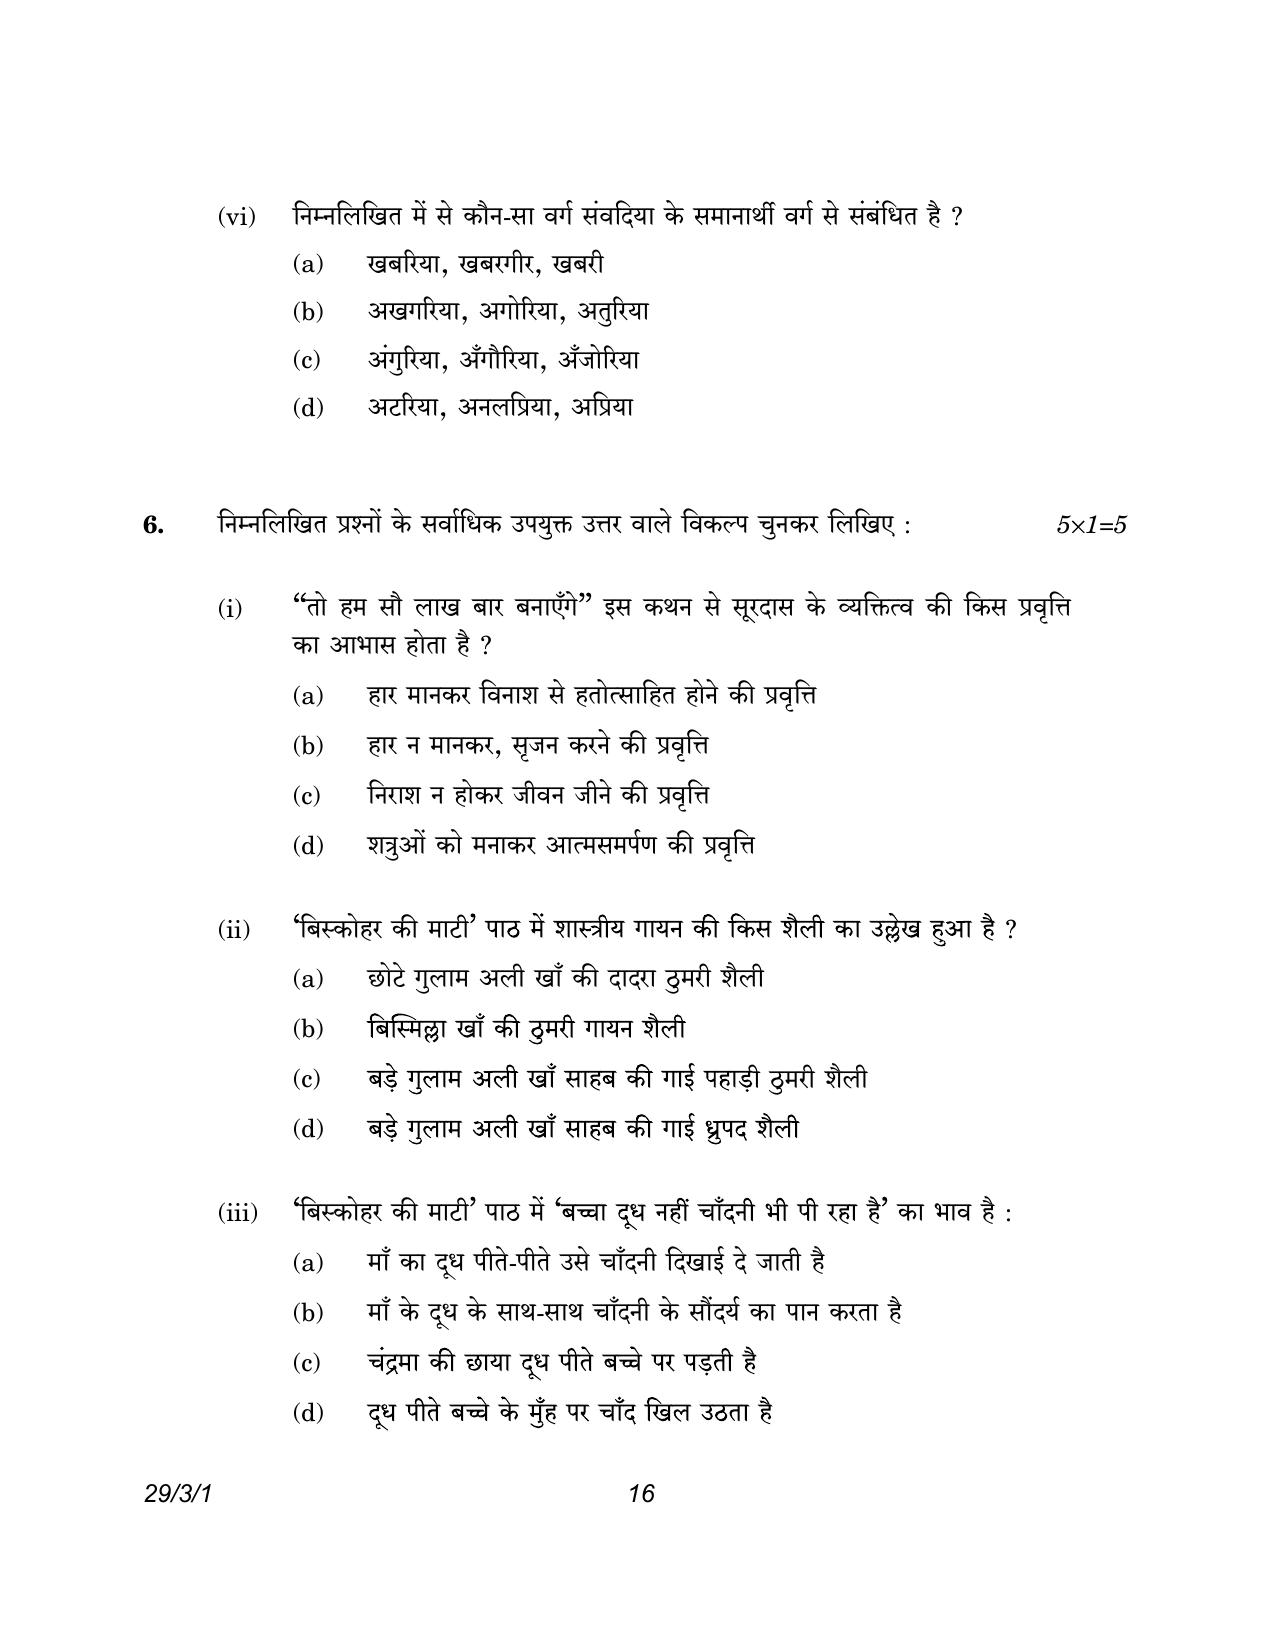 CBSE Class 12 29-3-1 Hindi Elective 2023 Question Paper - Page 16